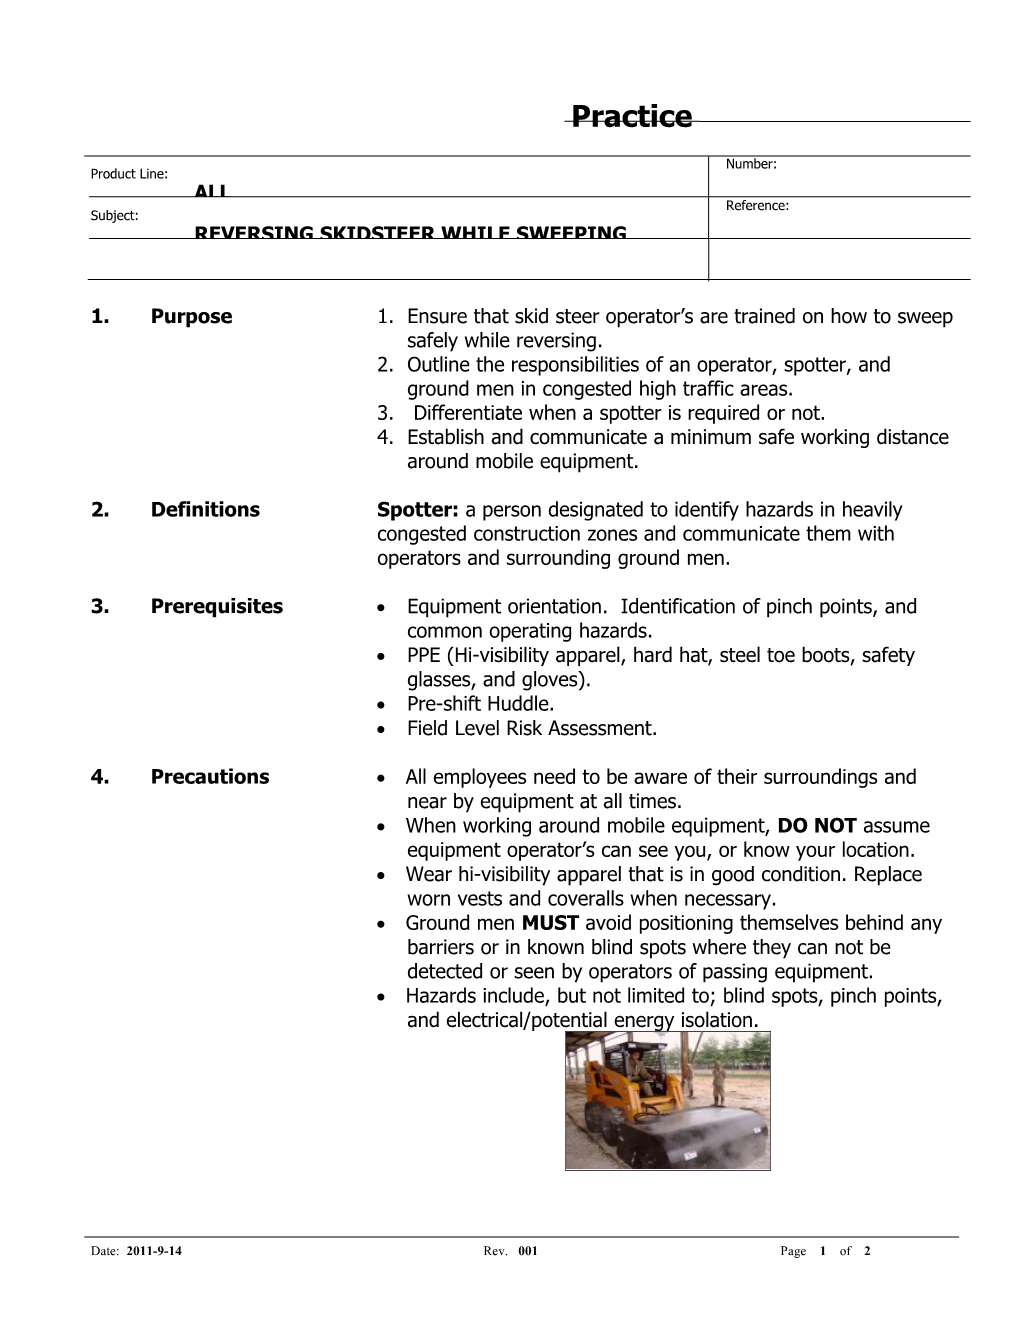 Ensure That Skid Steer Operator S Are Trained on How to Sweep Safely While Reversing